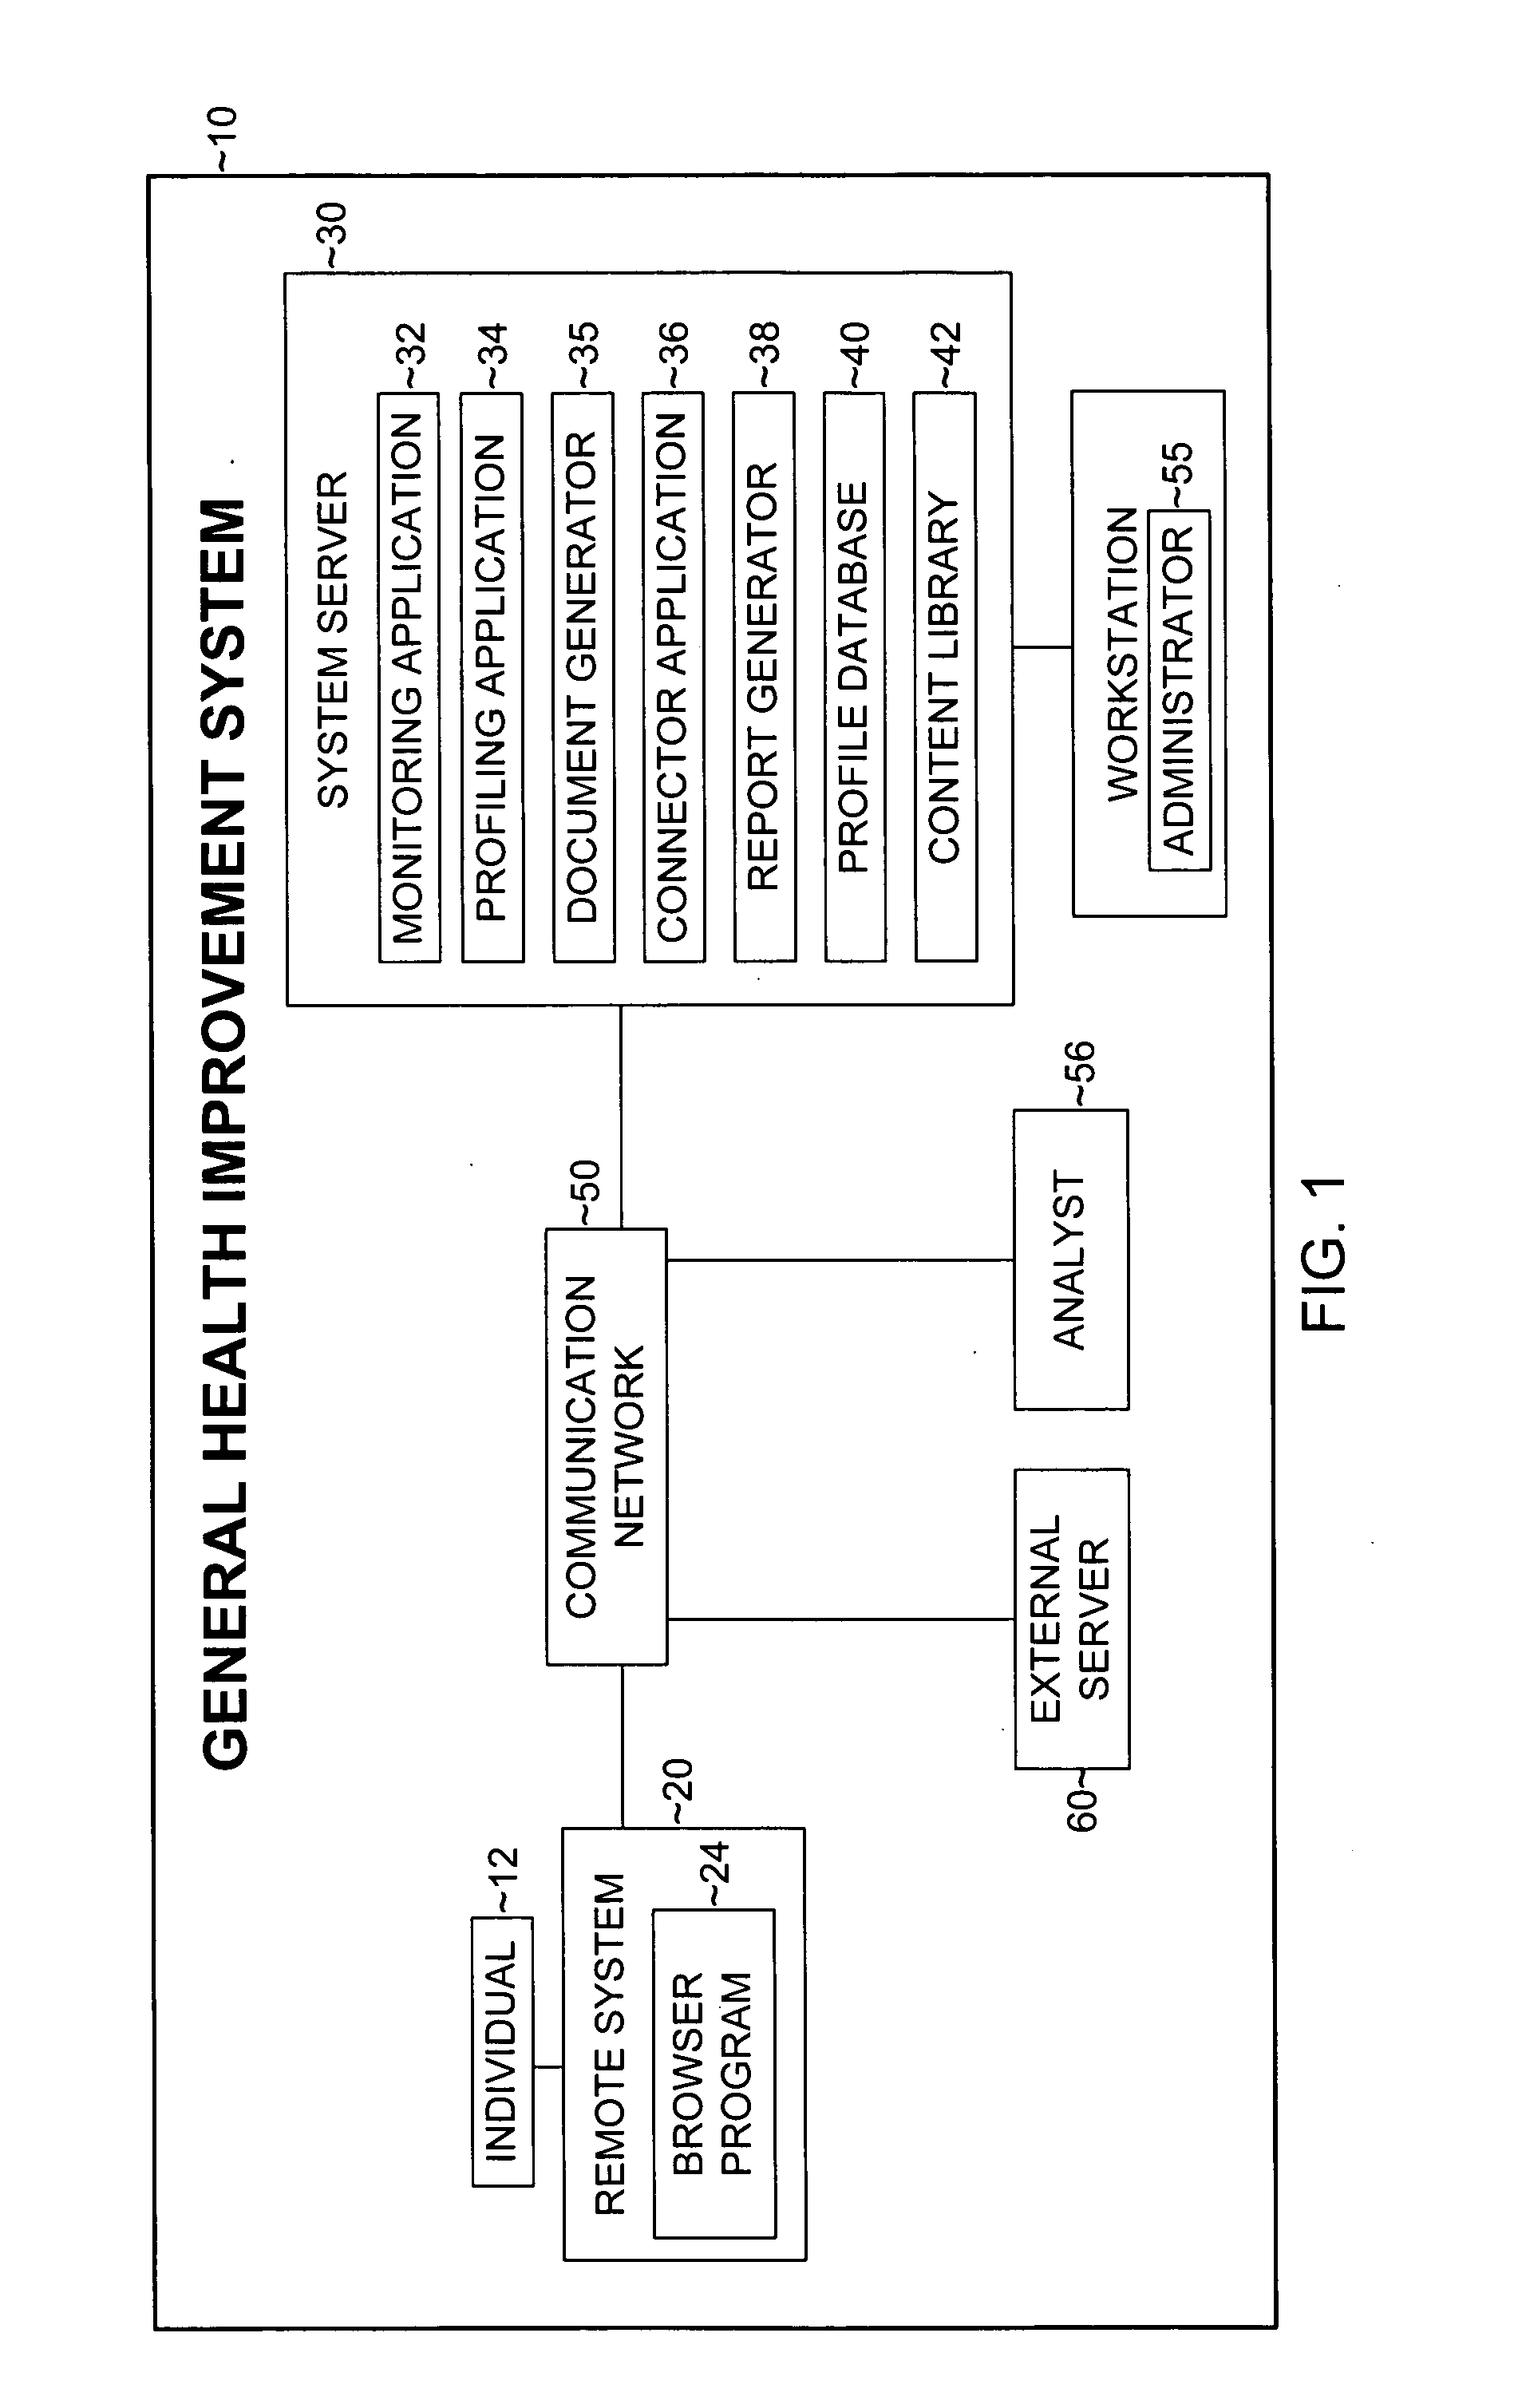 Method and system for monitoring health of an individual